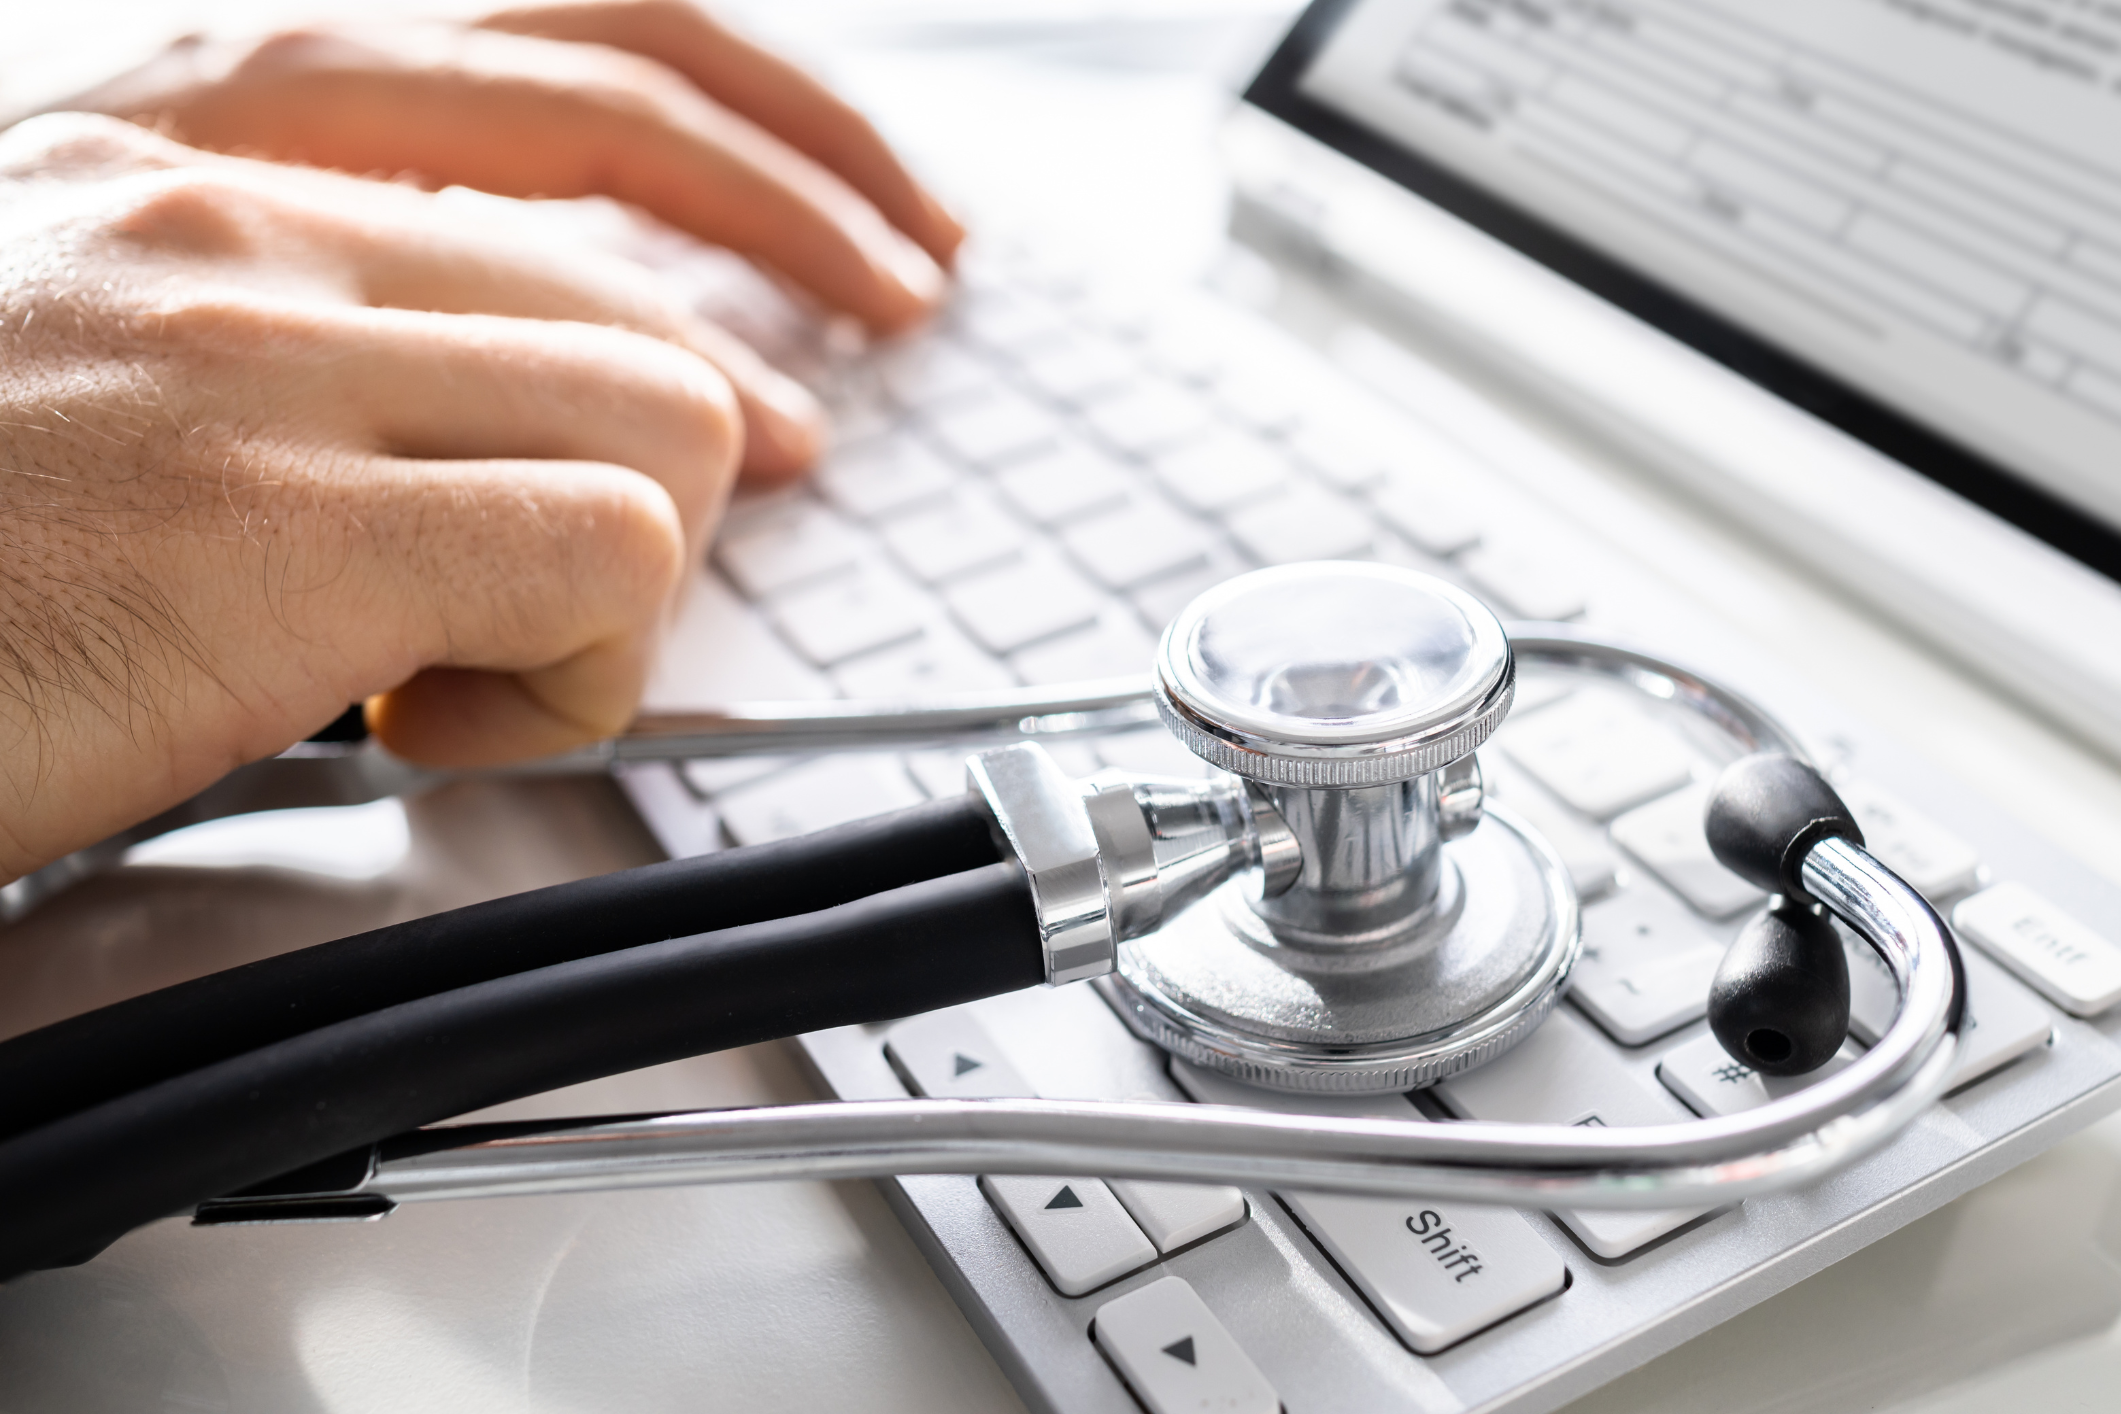 6 Reasons an EHR is Better Than Your SIS Health Module